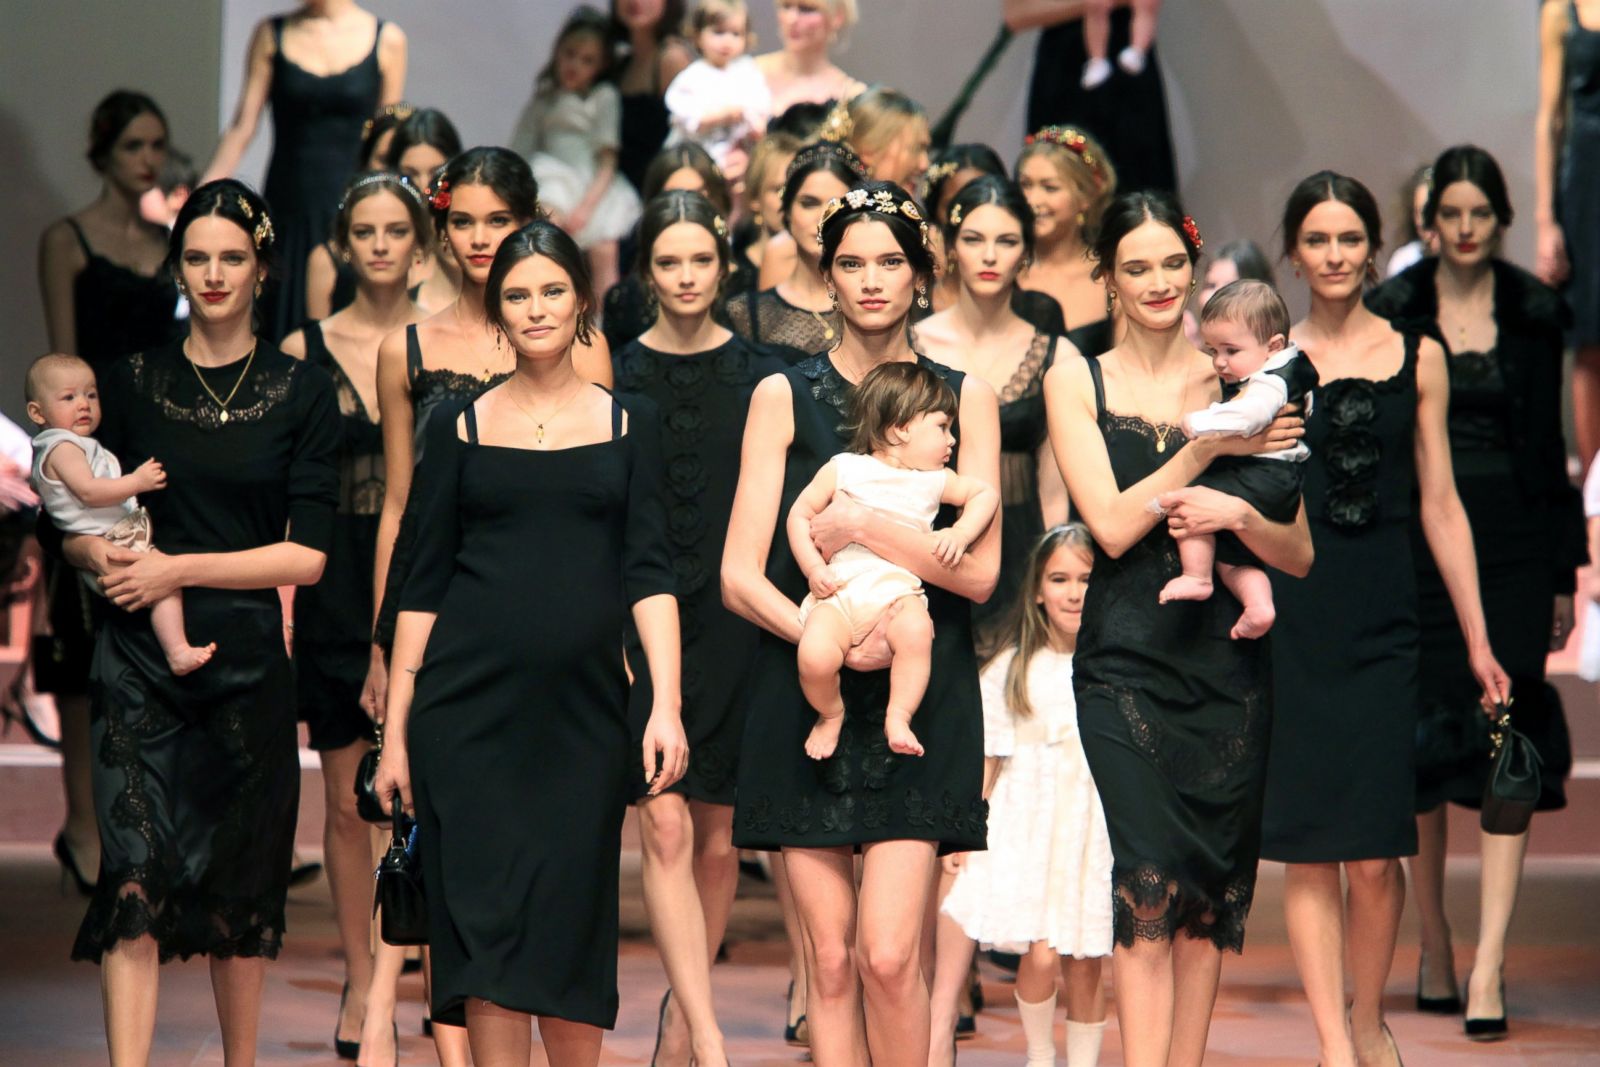 Dolce & Gabbana Celebrates Moms with Jaw-Dropping Fashion Picture | Hot